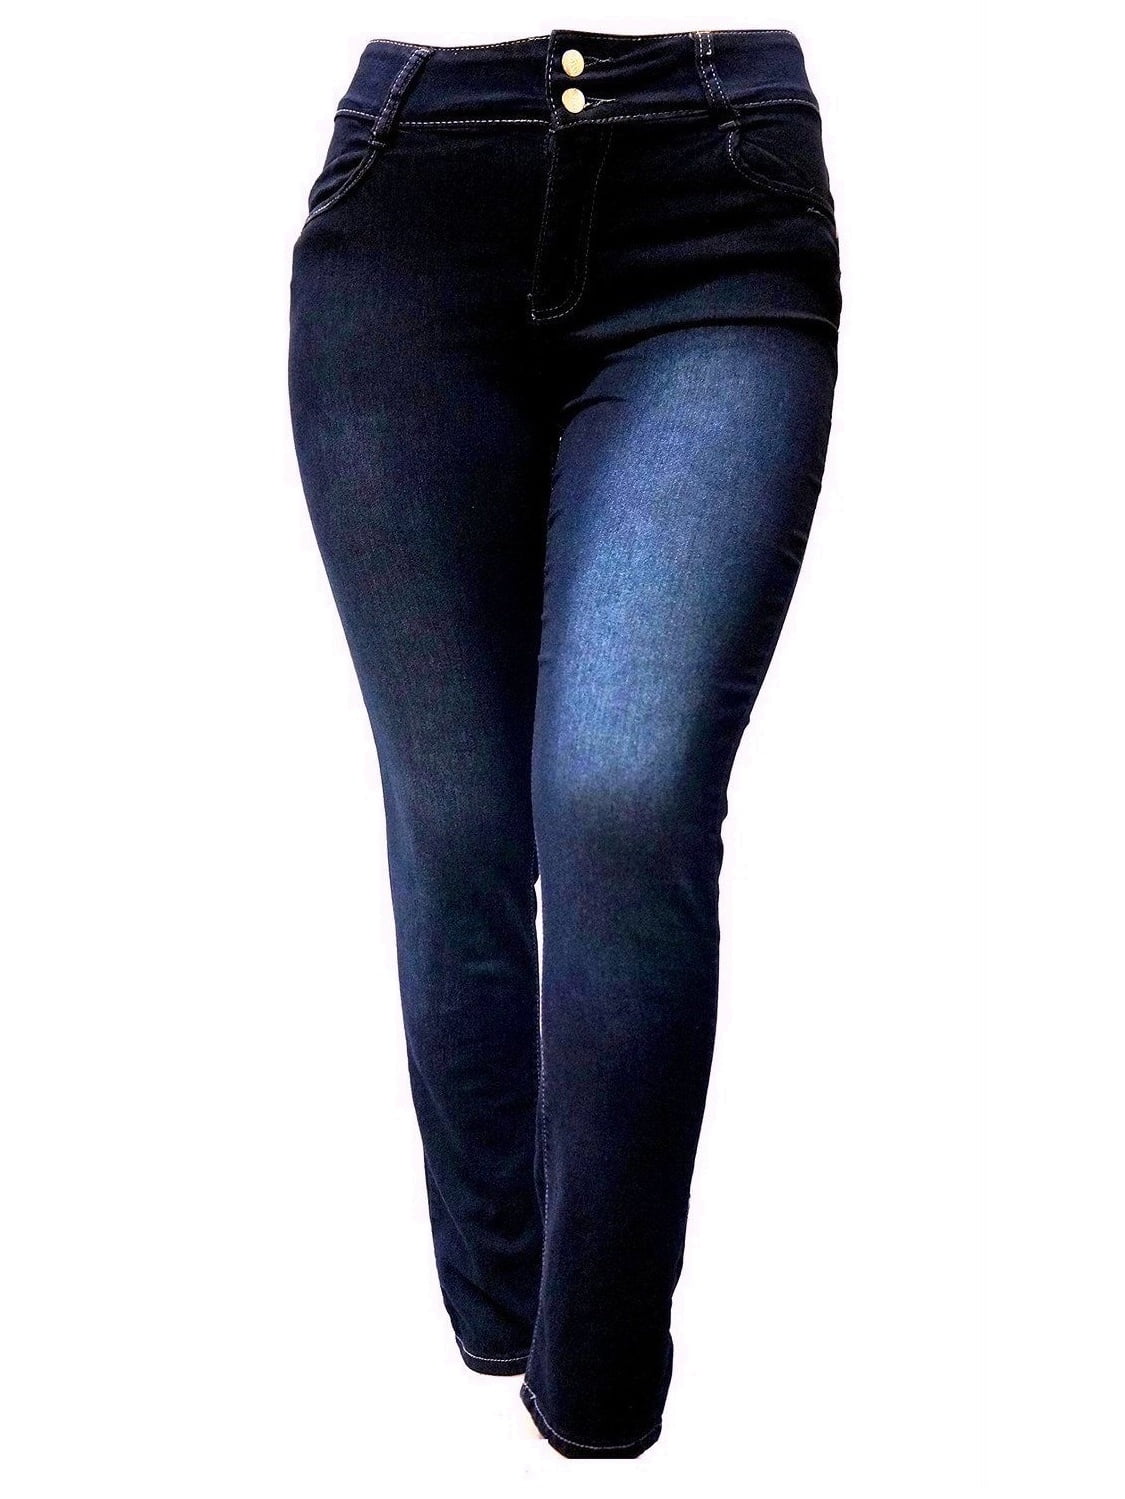 New With Tags Navy/Dark Blue High Waisted Women’s Skinny Jeans